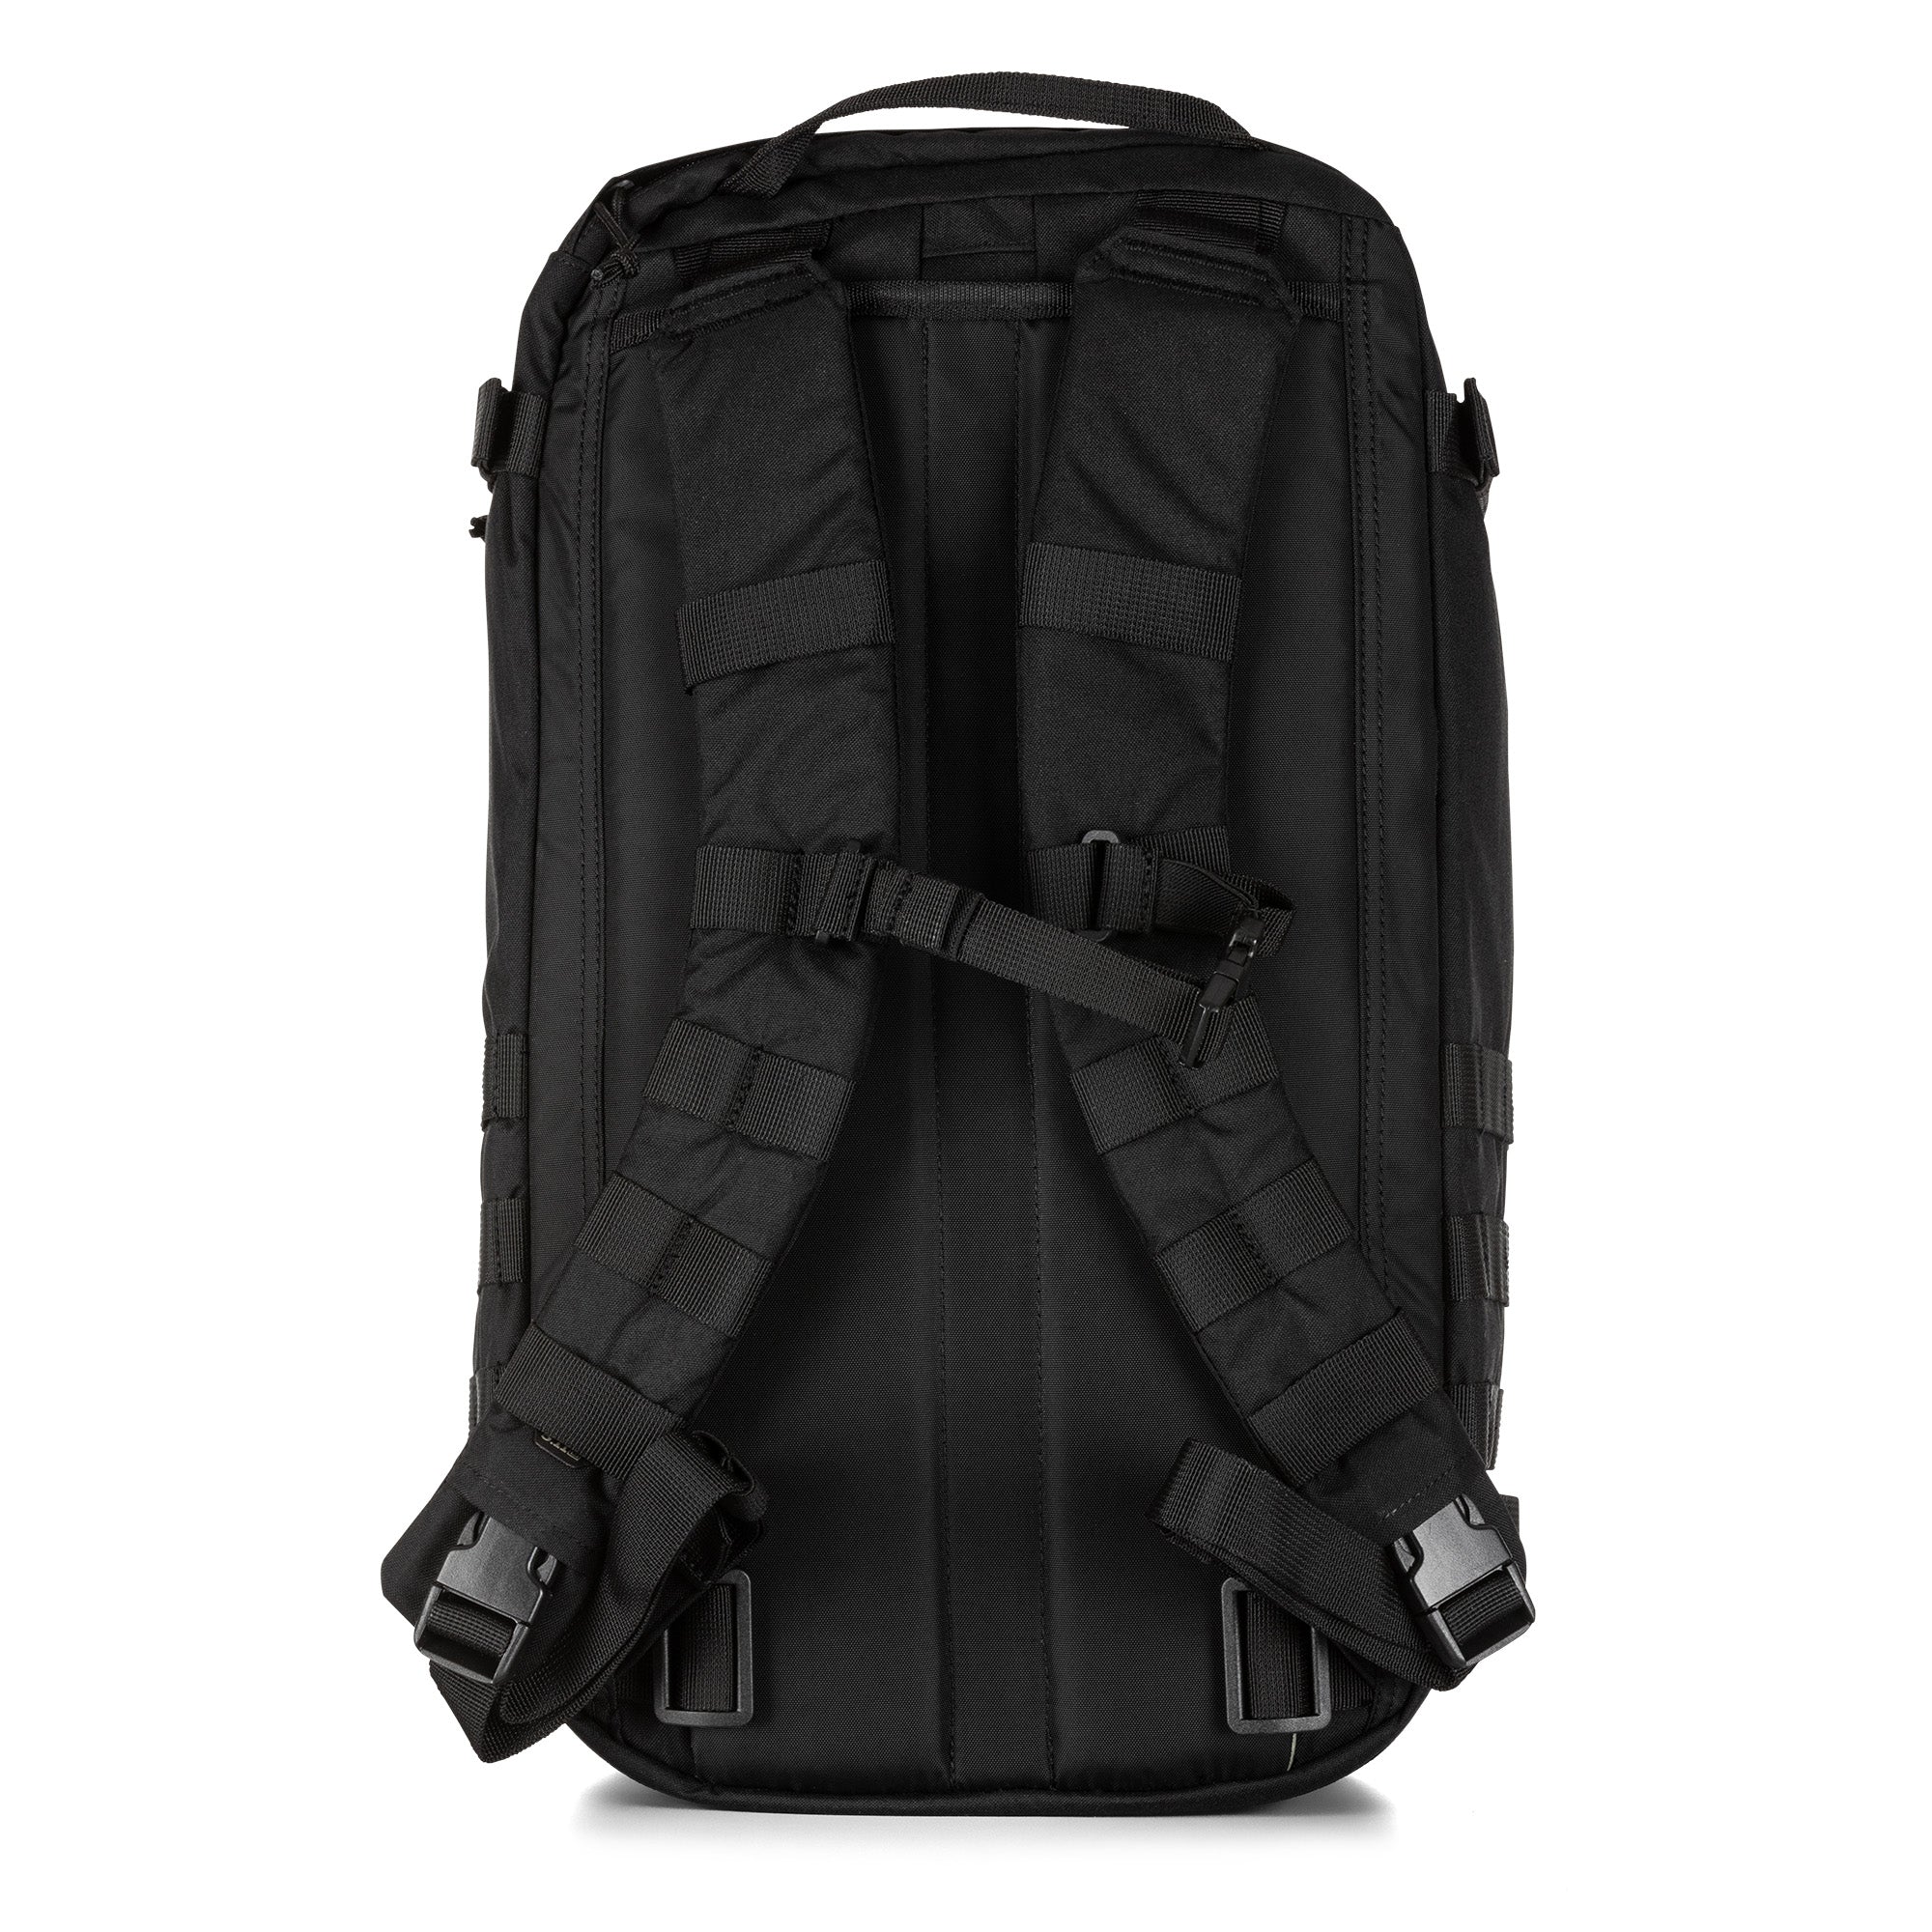 5.11 Tactical Daily Deploy 24 Pack 28L Bags, Packs and Cases 5.11 Tactical Black Tactical Gear Supplier Tactical Distributors Australia